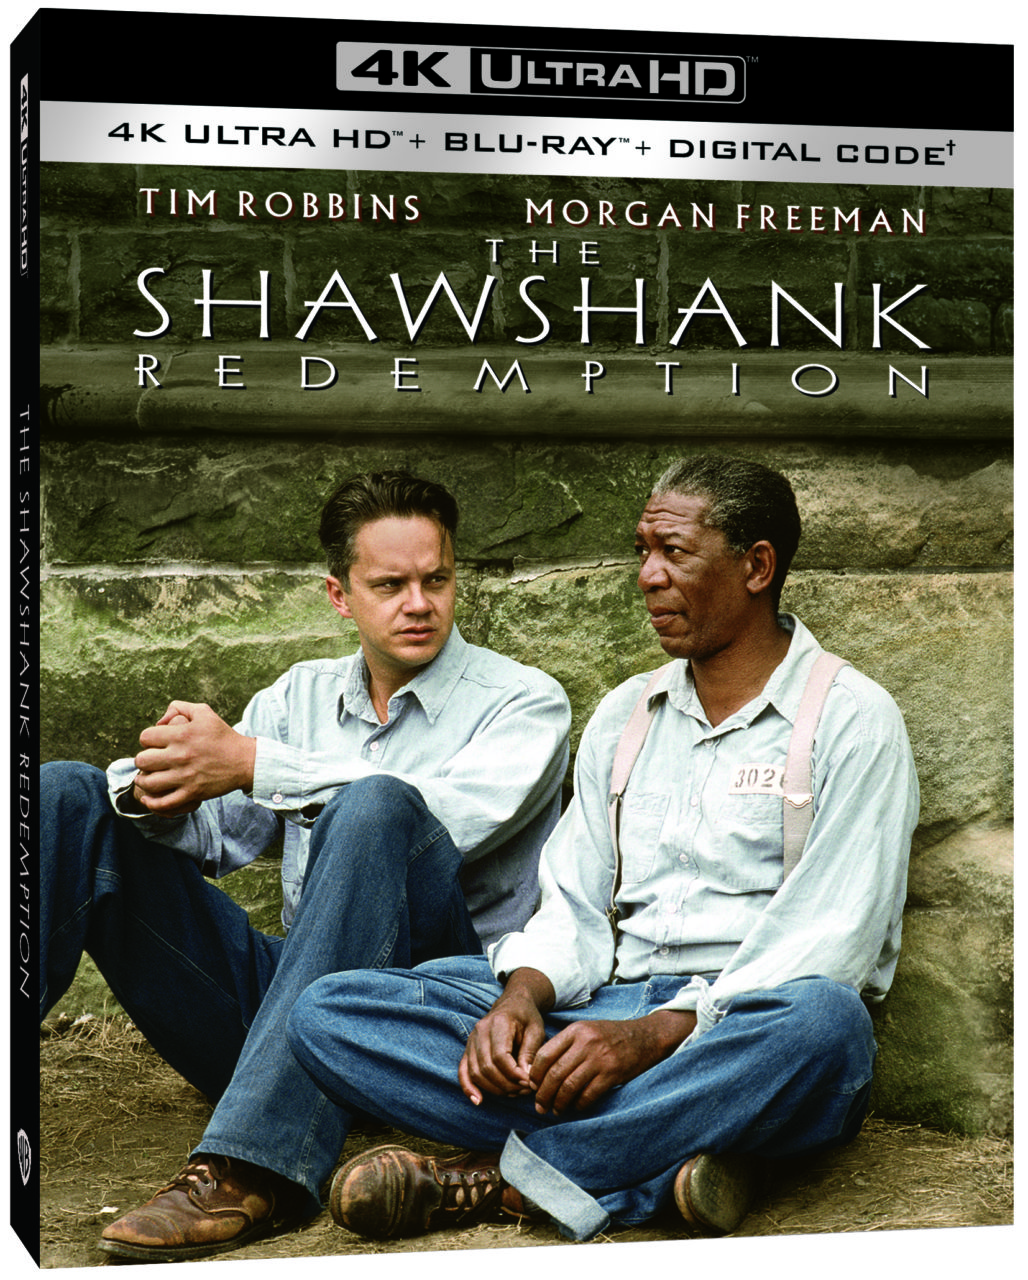 The Shawshank Redemption 4K Ultra HD Combo Pack cover (Warner Bros. Home Entertainment)